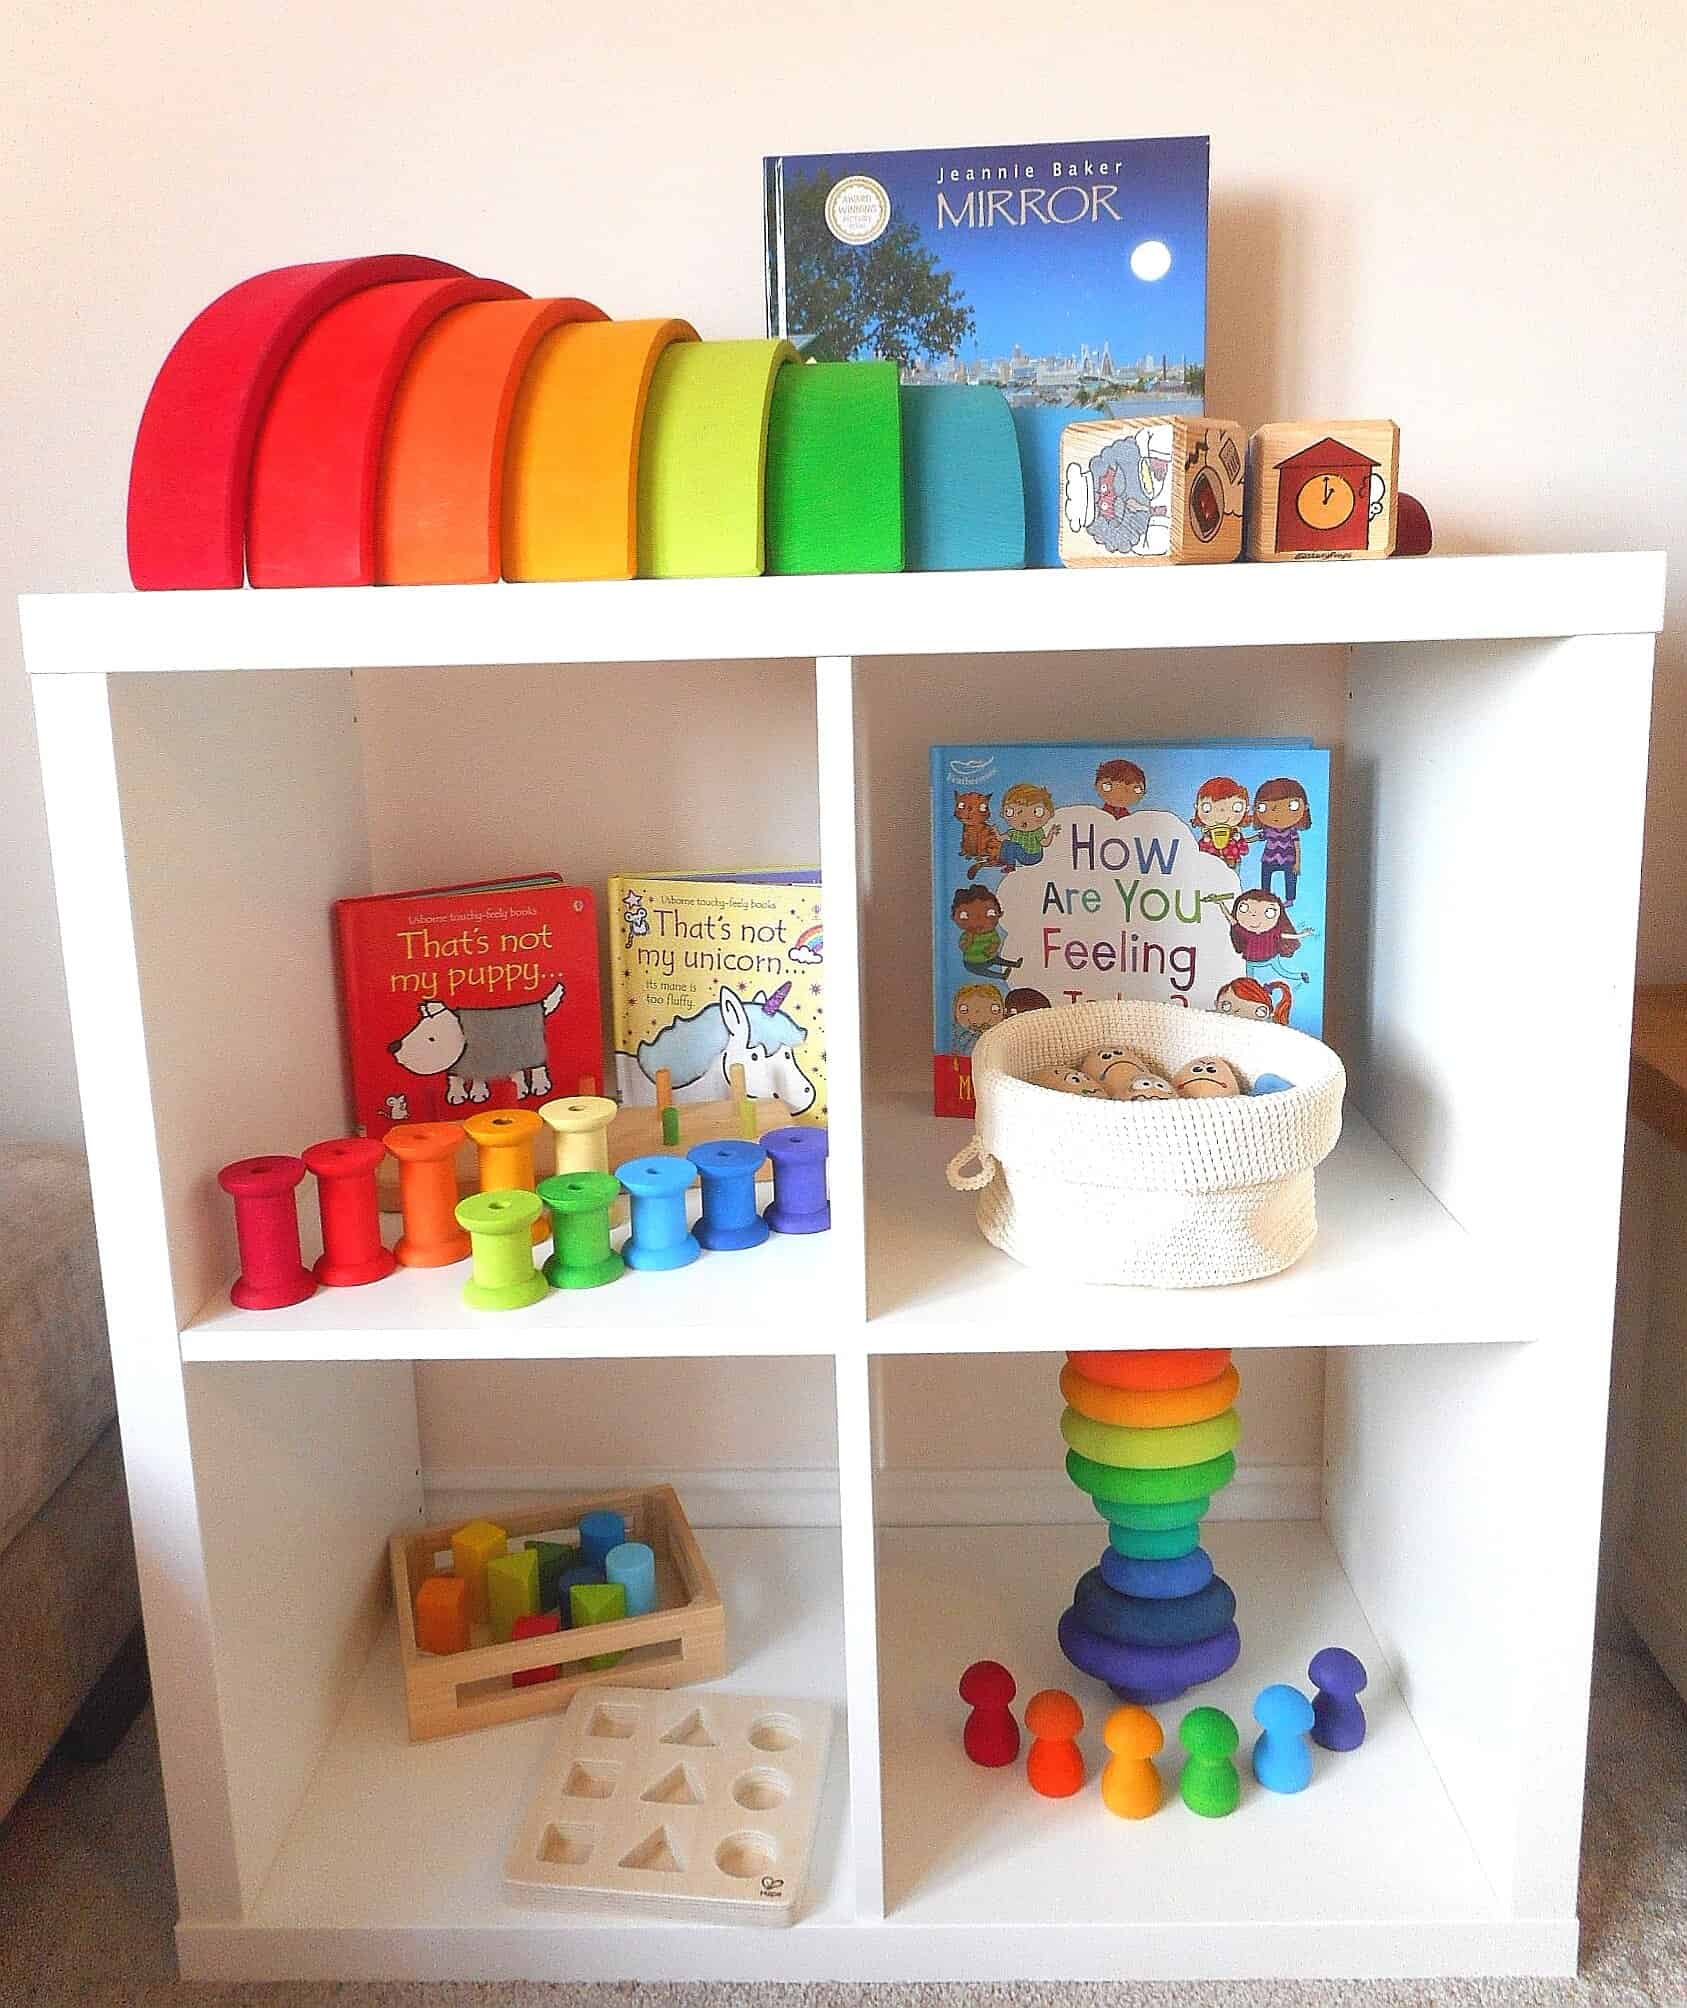 Shelfie - early years - toddler play - Preschooler - Grimms - Grapat - Eric&Albert - books - stories  - Wooden Toys - Construction - Stacking- Mindfulness - Puzzles - Colours - Rainbow - Matching - Language - Words - Loose Parts - Farm Animals- Stories  - Mushrooms - Story Stones  - Small World - Feelings - Emotions - Number - numeracy - Books - Stories - Hape - Grimms